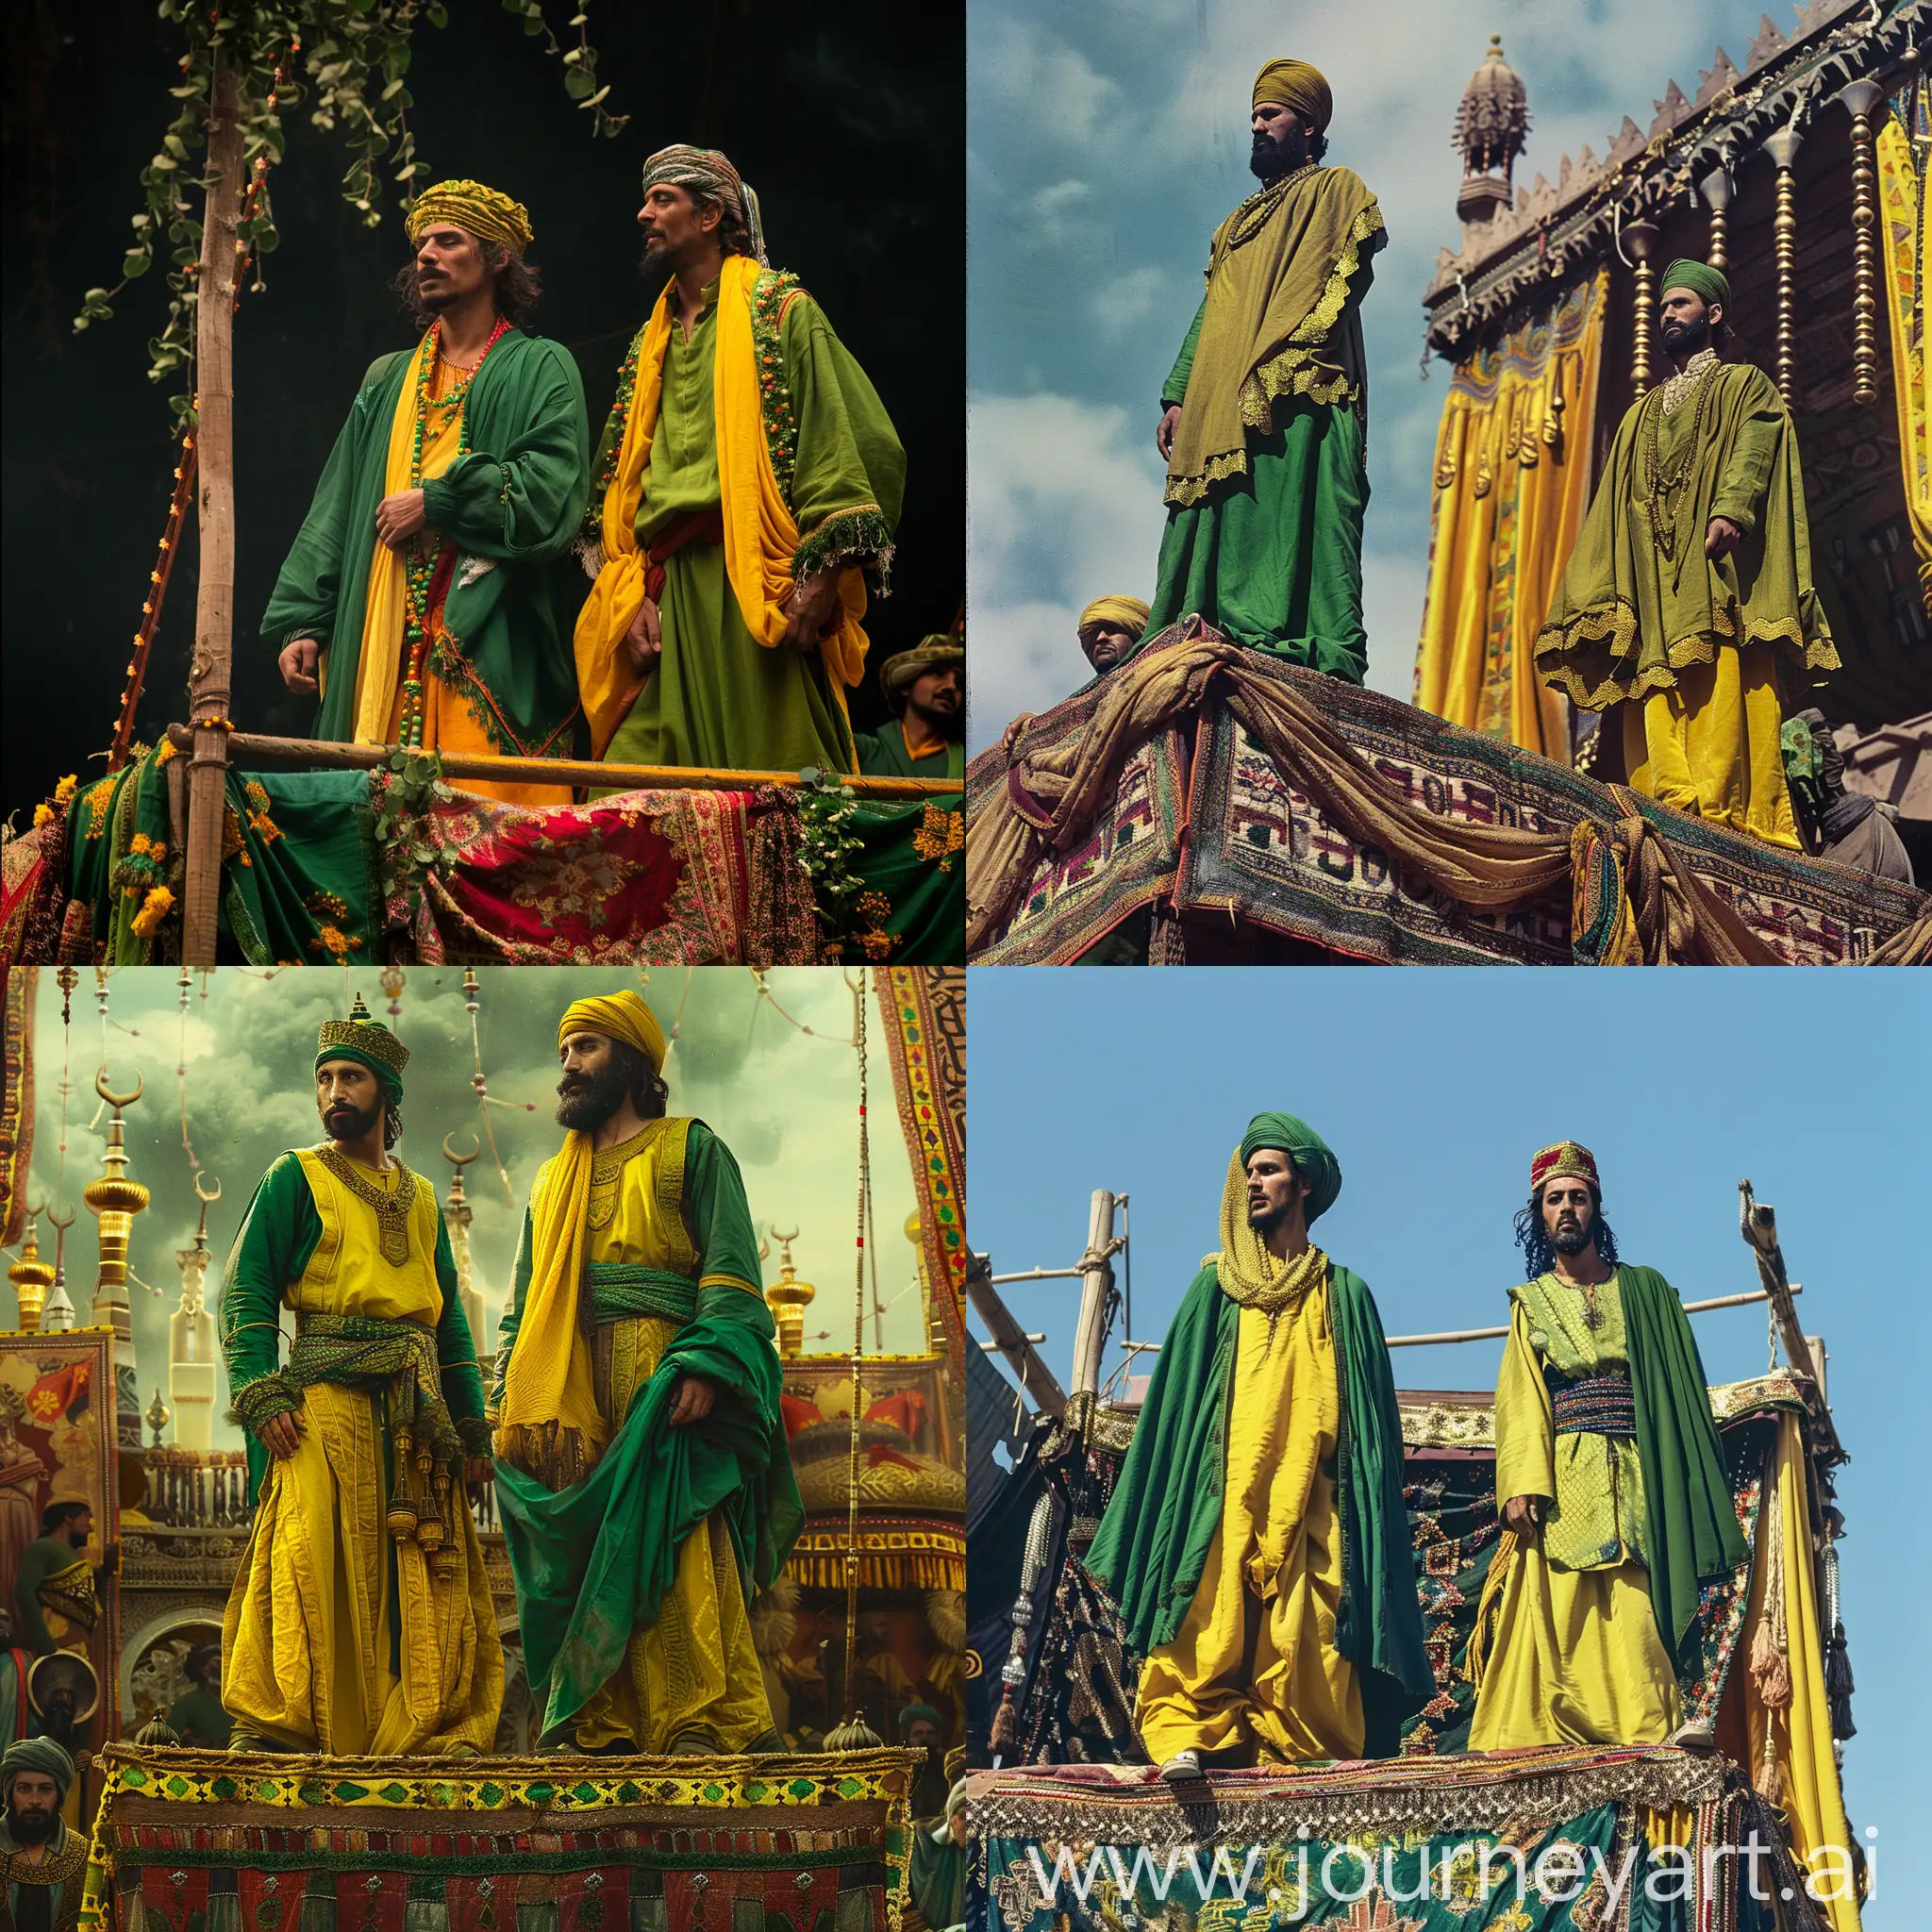 The image depicts a vibrant and celebratory scene inspired by the historic event of Ghadir Khumm. Two men, dressed in green and yellow robes, stand on a richly decorated platform. One man, wearing a yellow robe with a green scarf, raises the hand of the other man, who is dressed in a green robe with a white headscarf. The platform is adorned with colorful patterns and is elevated above a crowd of people. The crowd, dressed in various traditional garments, looks up towards the two men in admiration and celebration. The sky is clear blue with a few white clouds and birds flying, adding to the festive and joyful atmosphere of the scene. The overall mood is one of unity, celebration, and historical significance.